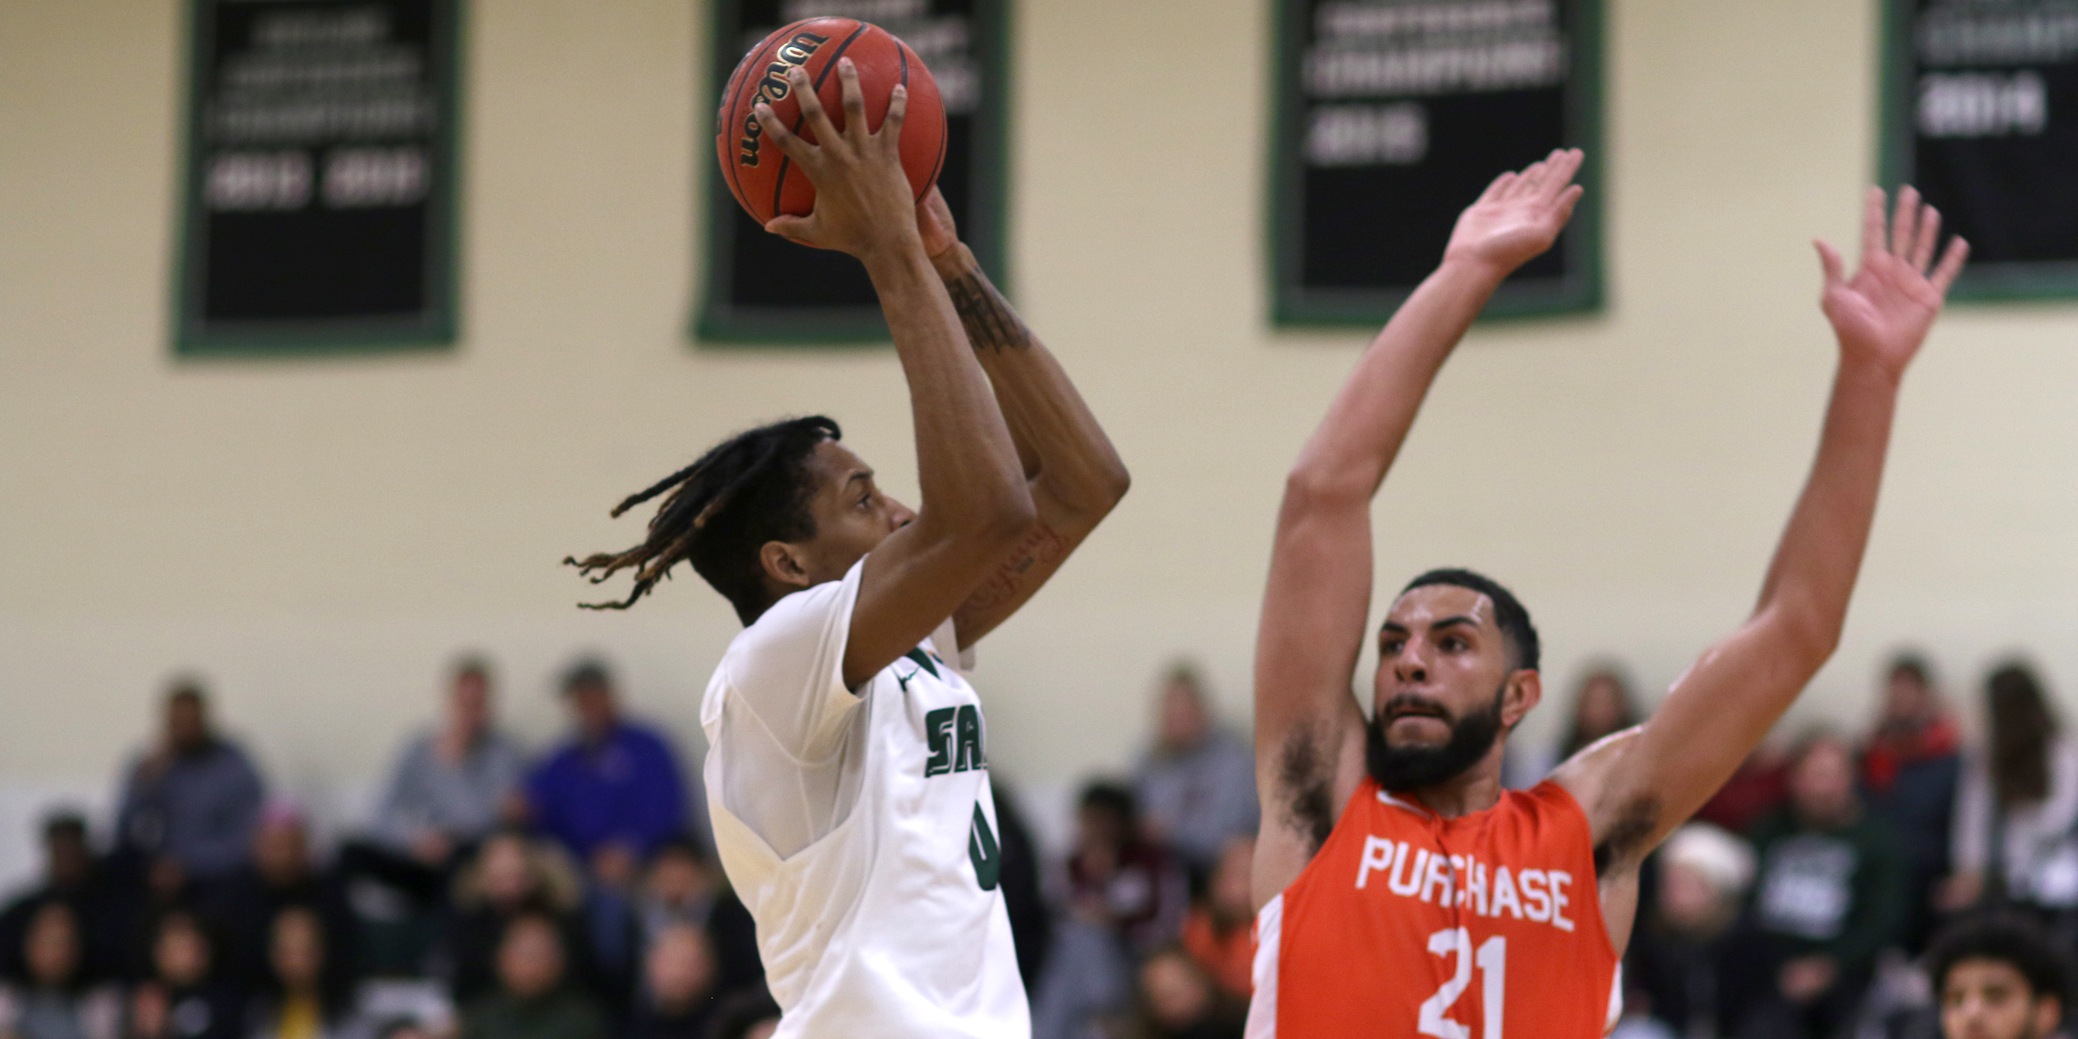 Balanced attack leads Sage men past Purchase, 77-73